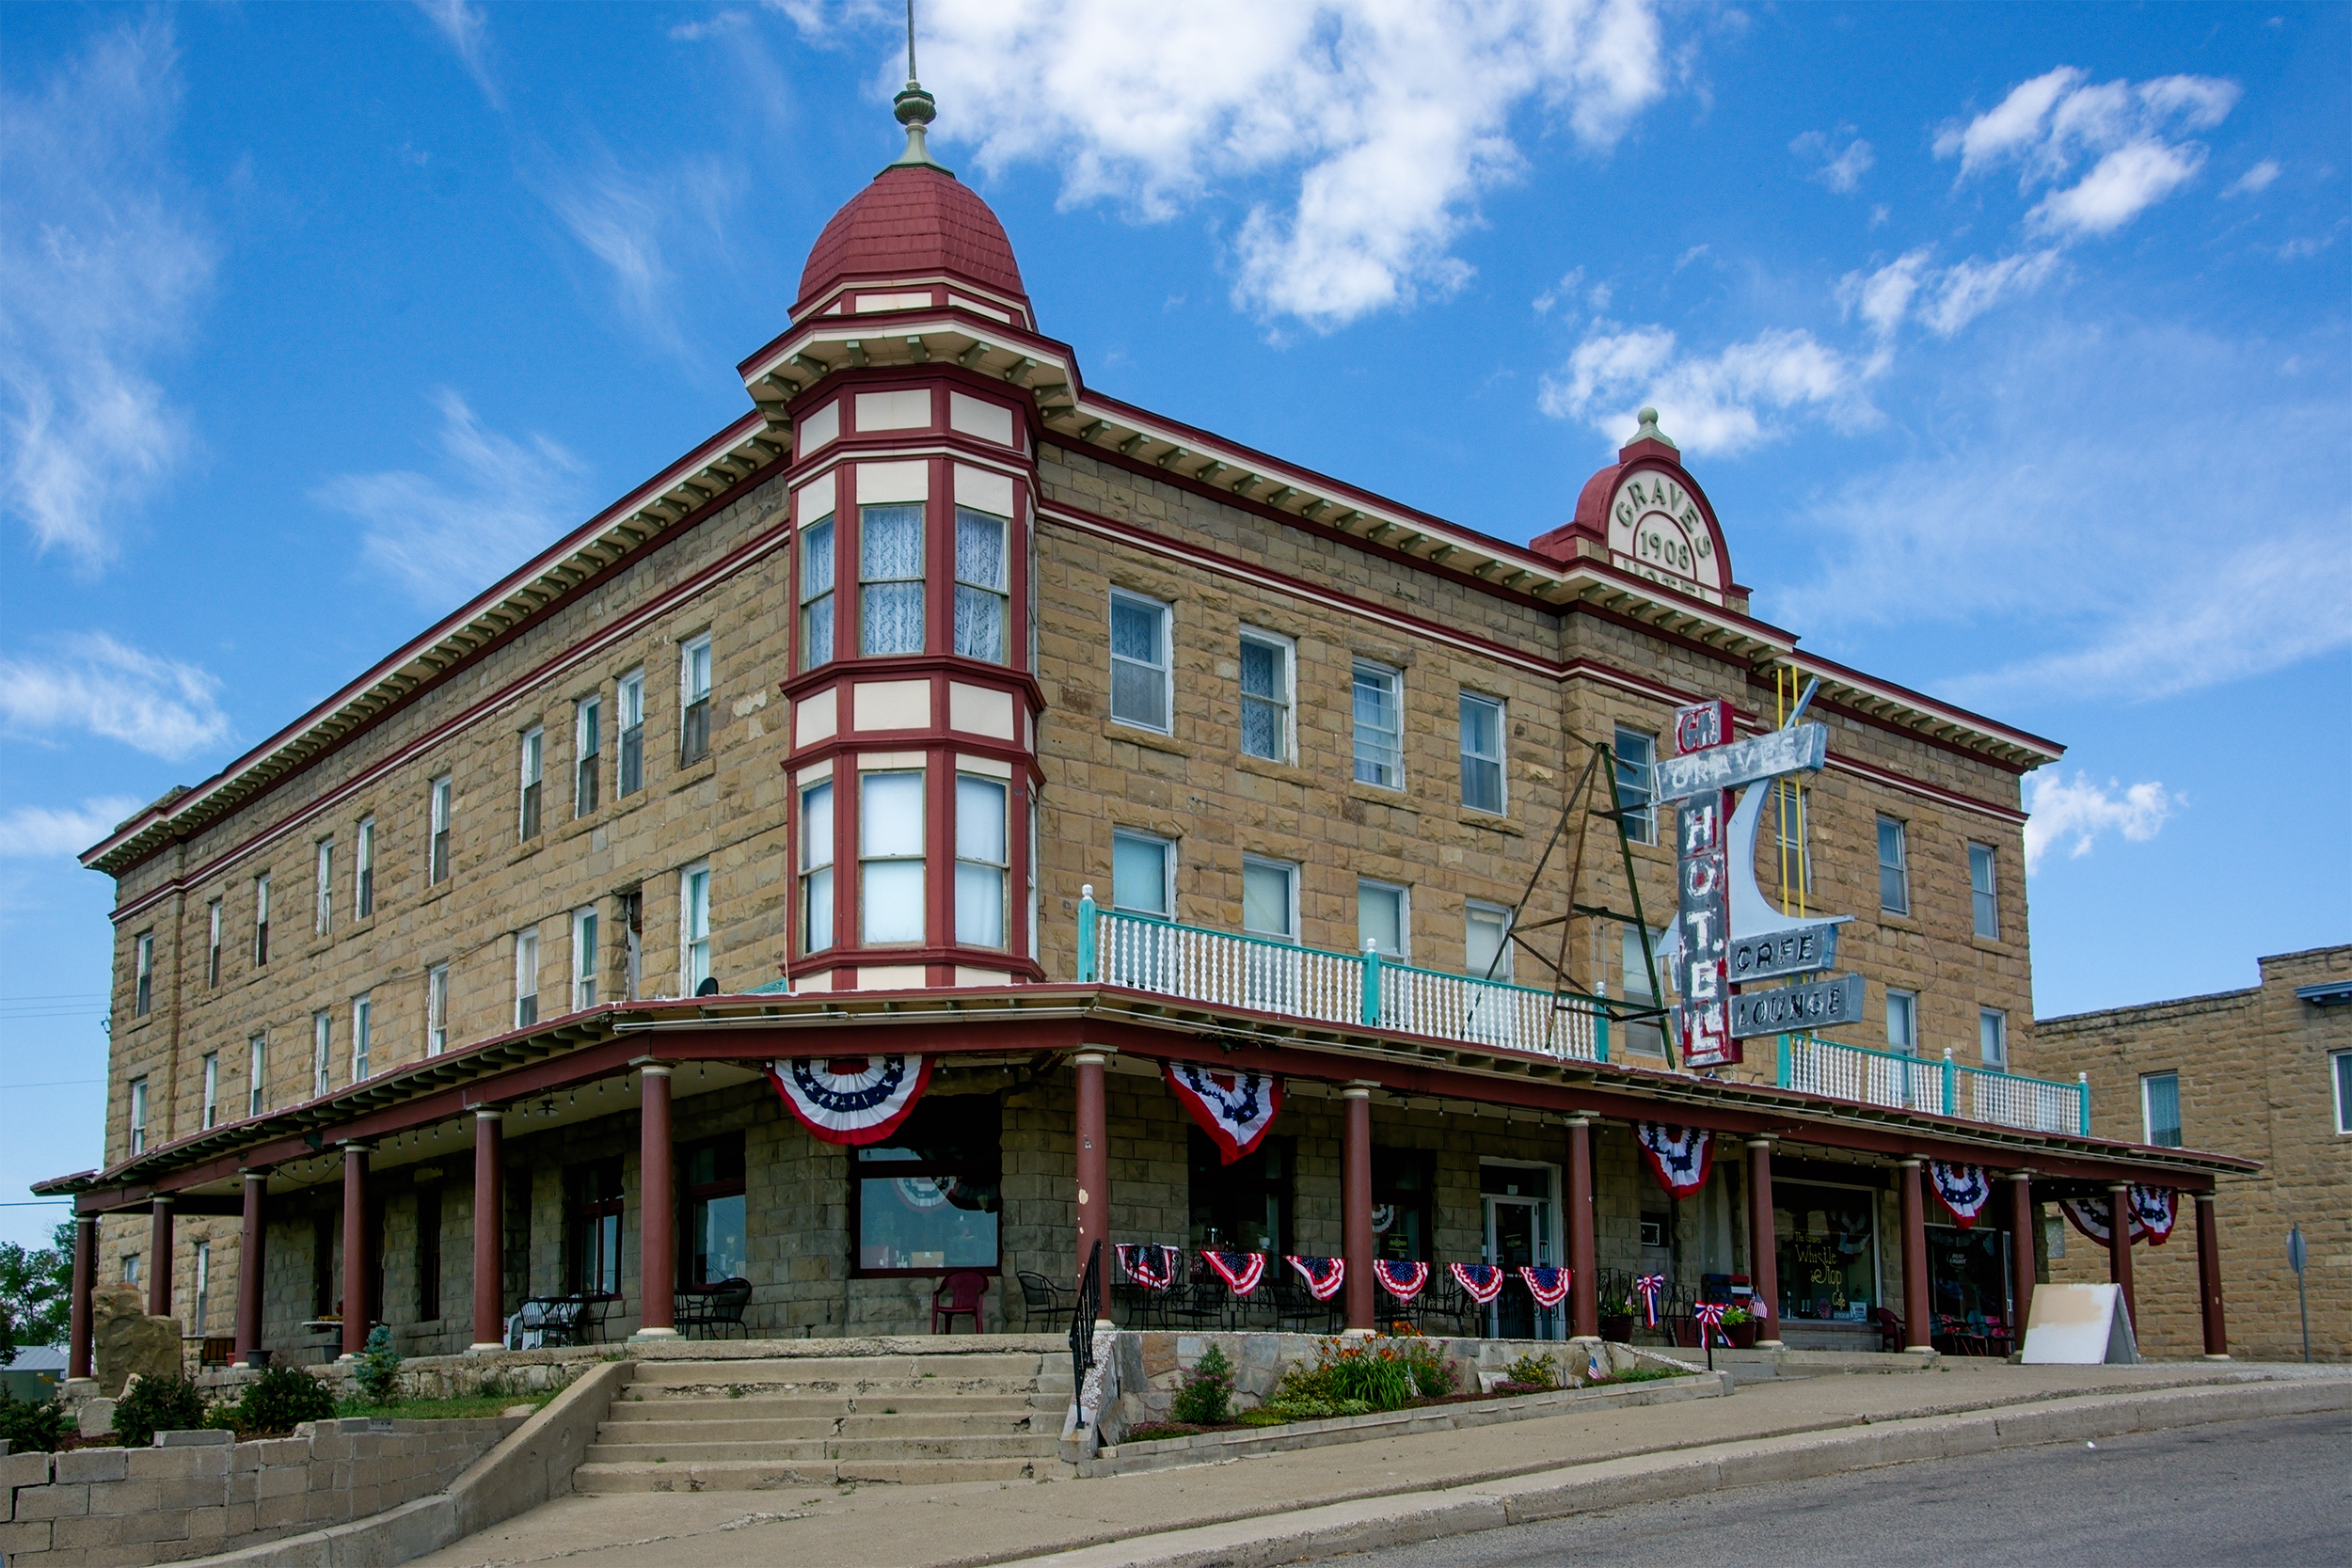 Graves Hotel - 106 Central Avenue South, Harlowton, Montana U.S.A. - July 1, 2017